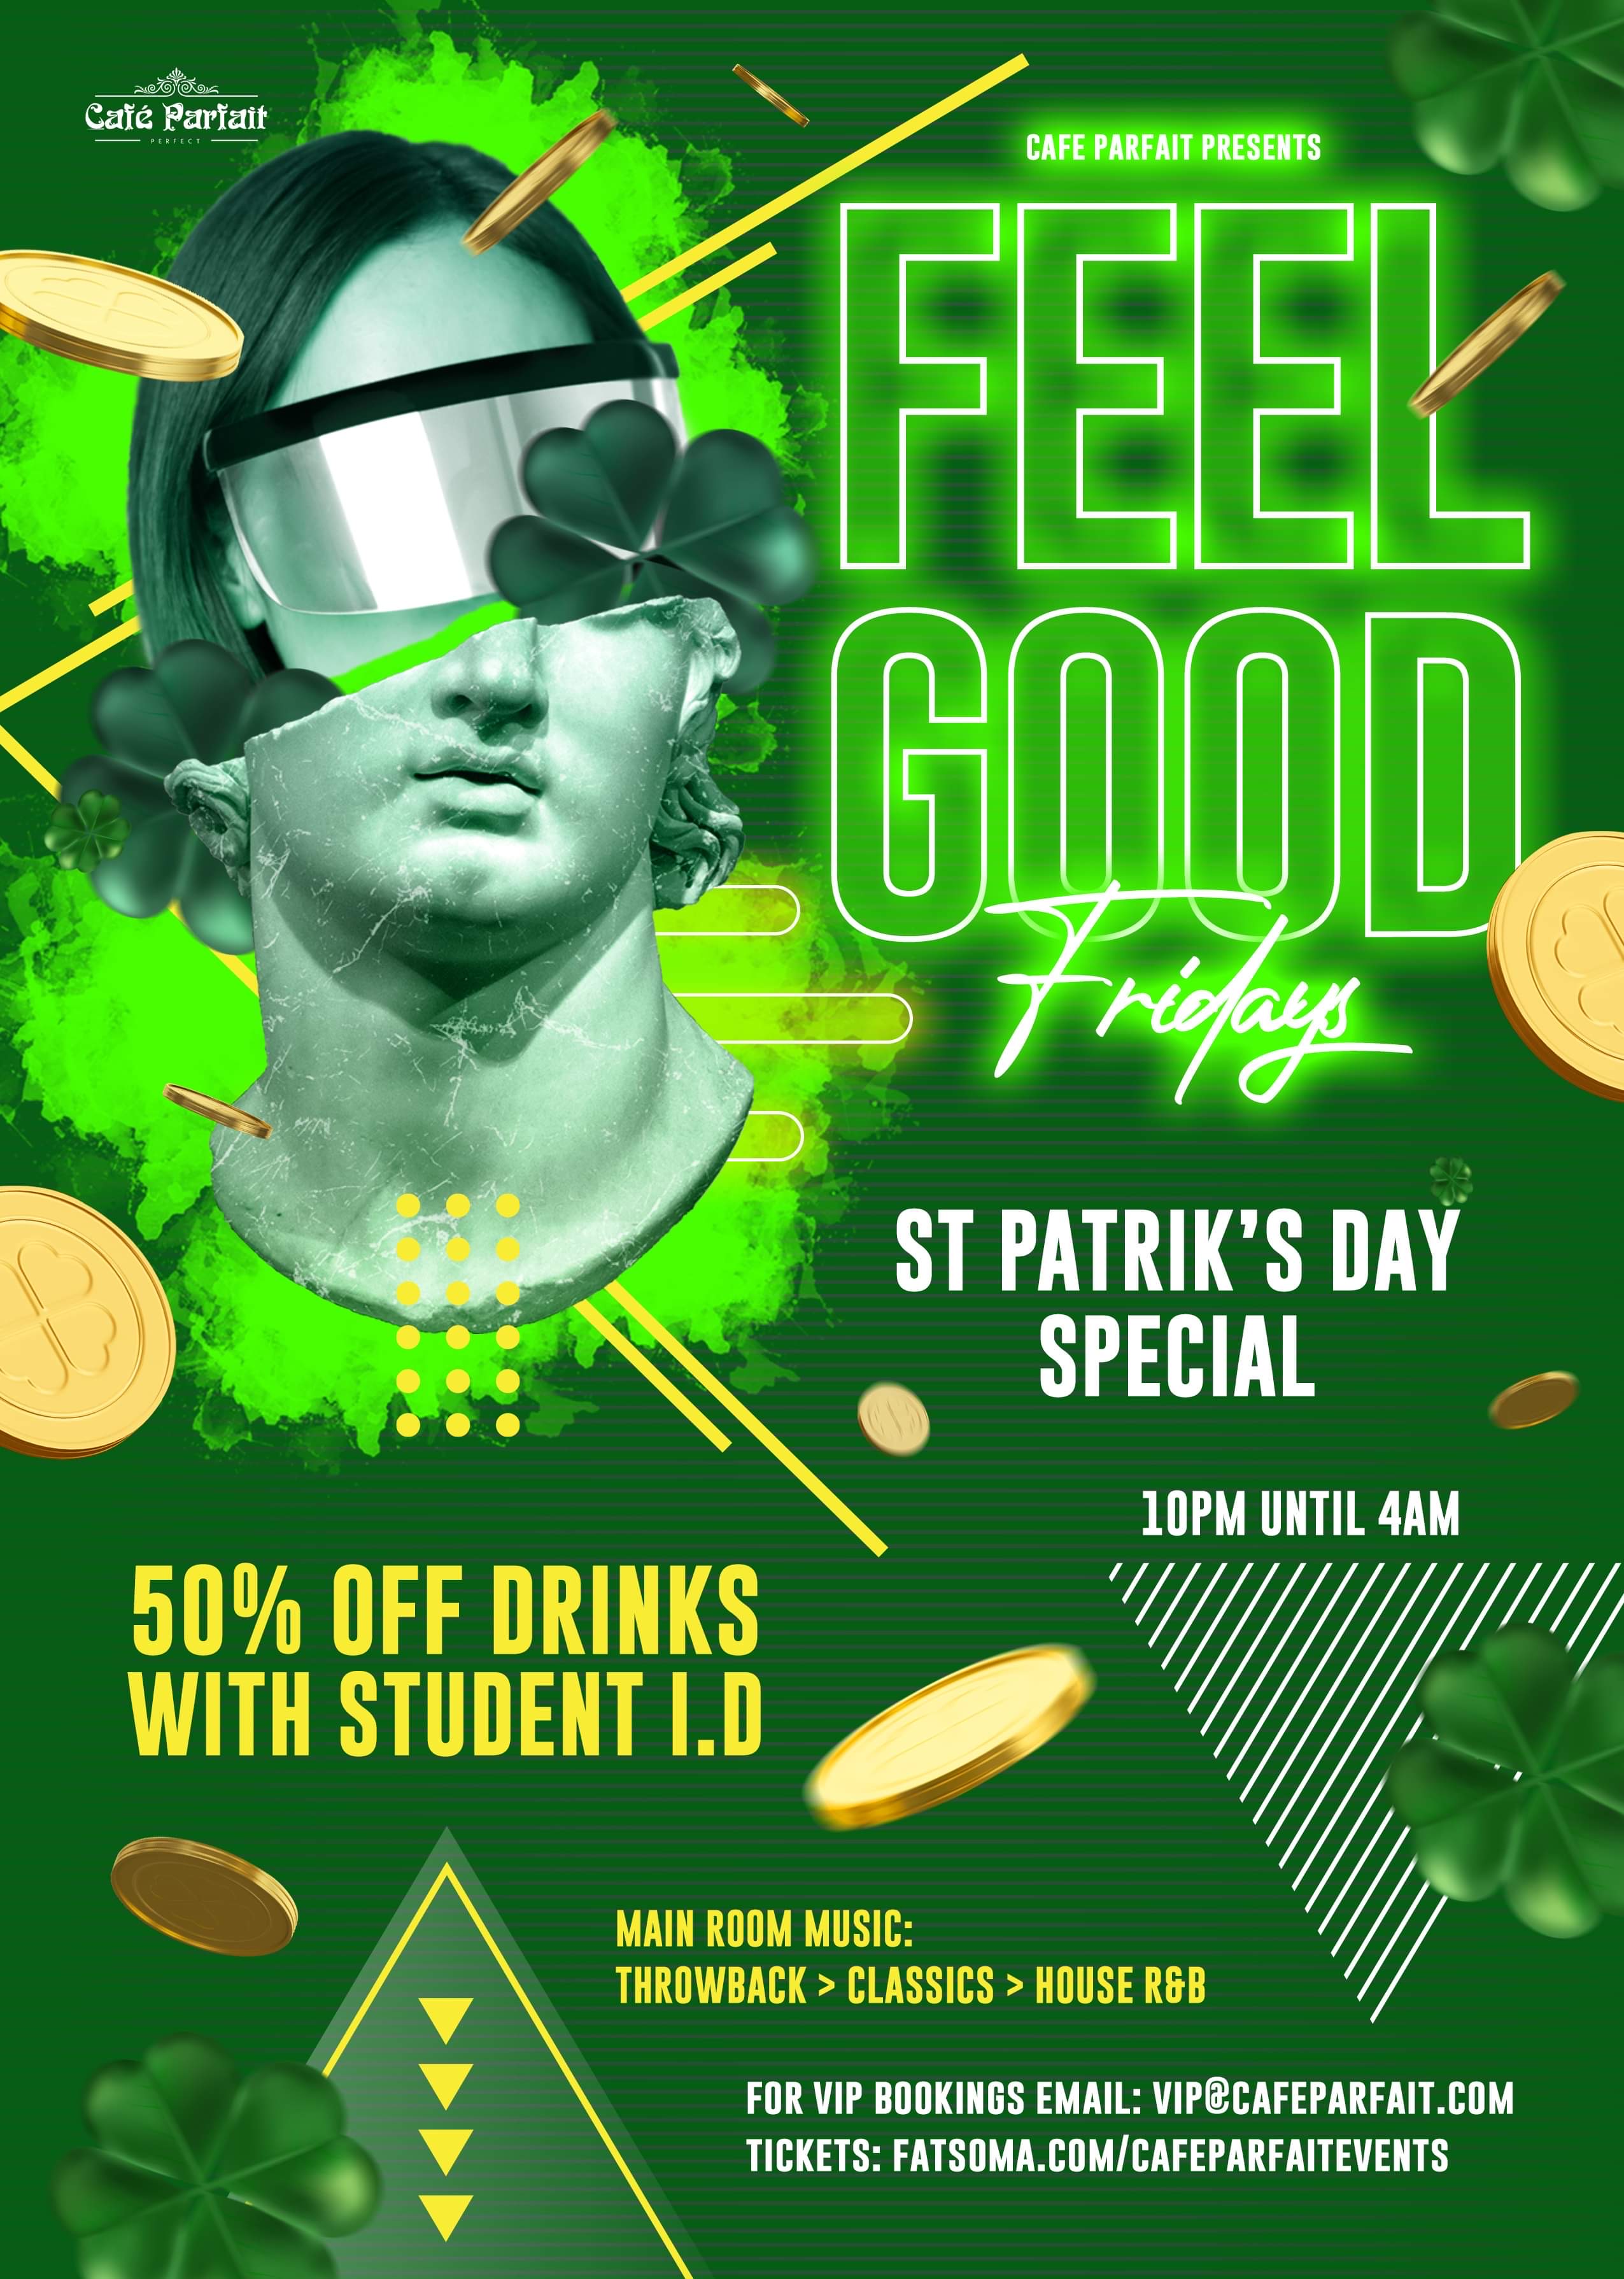 ST PATRICK’S DAY//Feel . Good . Friday @ Cafe Parfait